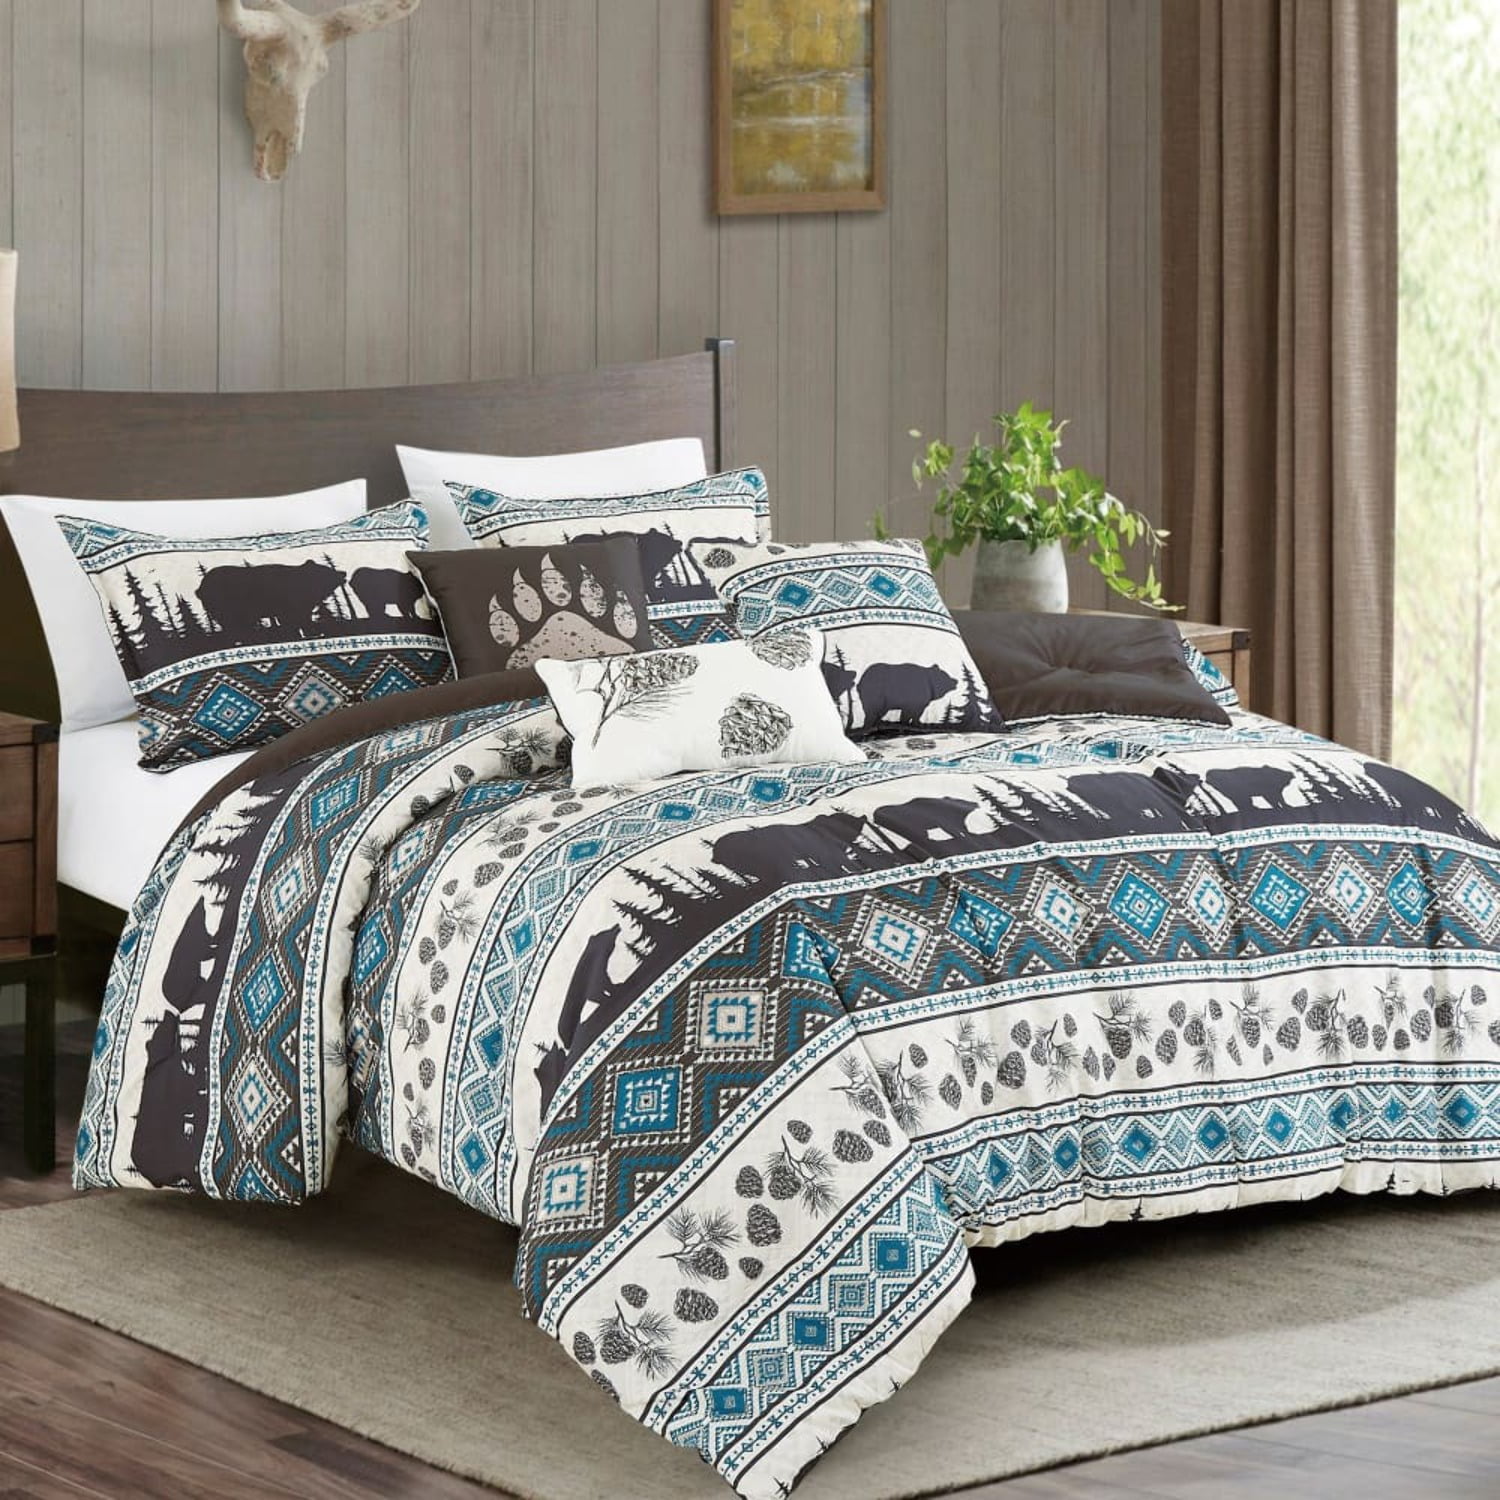 3 pc Western Bedding FREE SHIPPING! Southwest Longhorn Bed Spread Quilt 